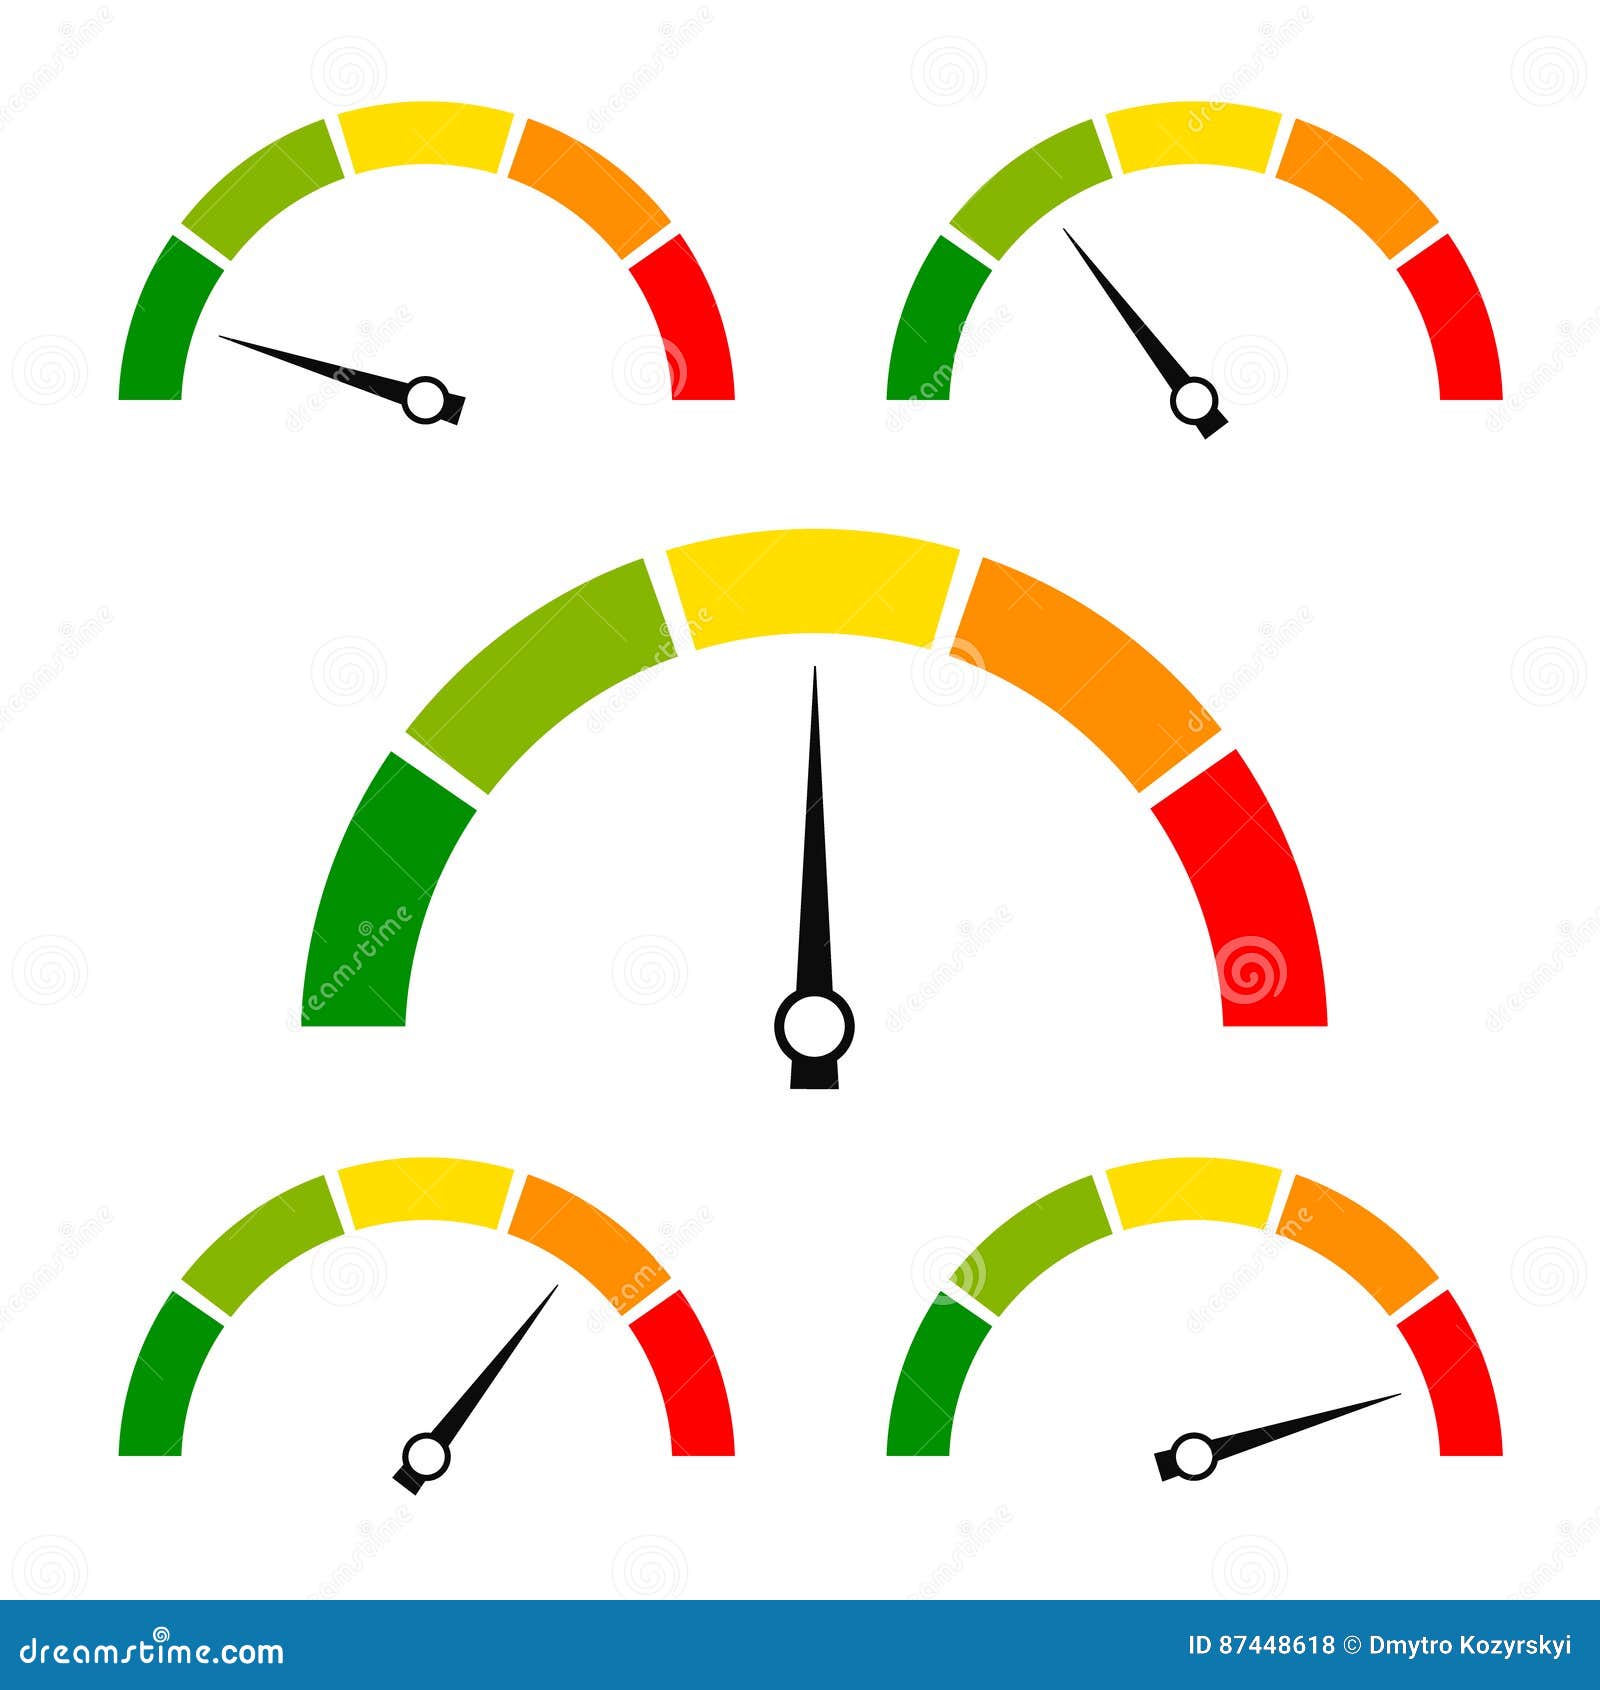 speed metering icon   on white background